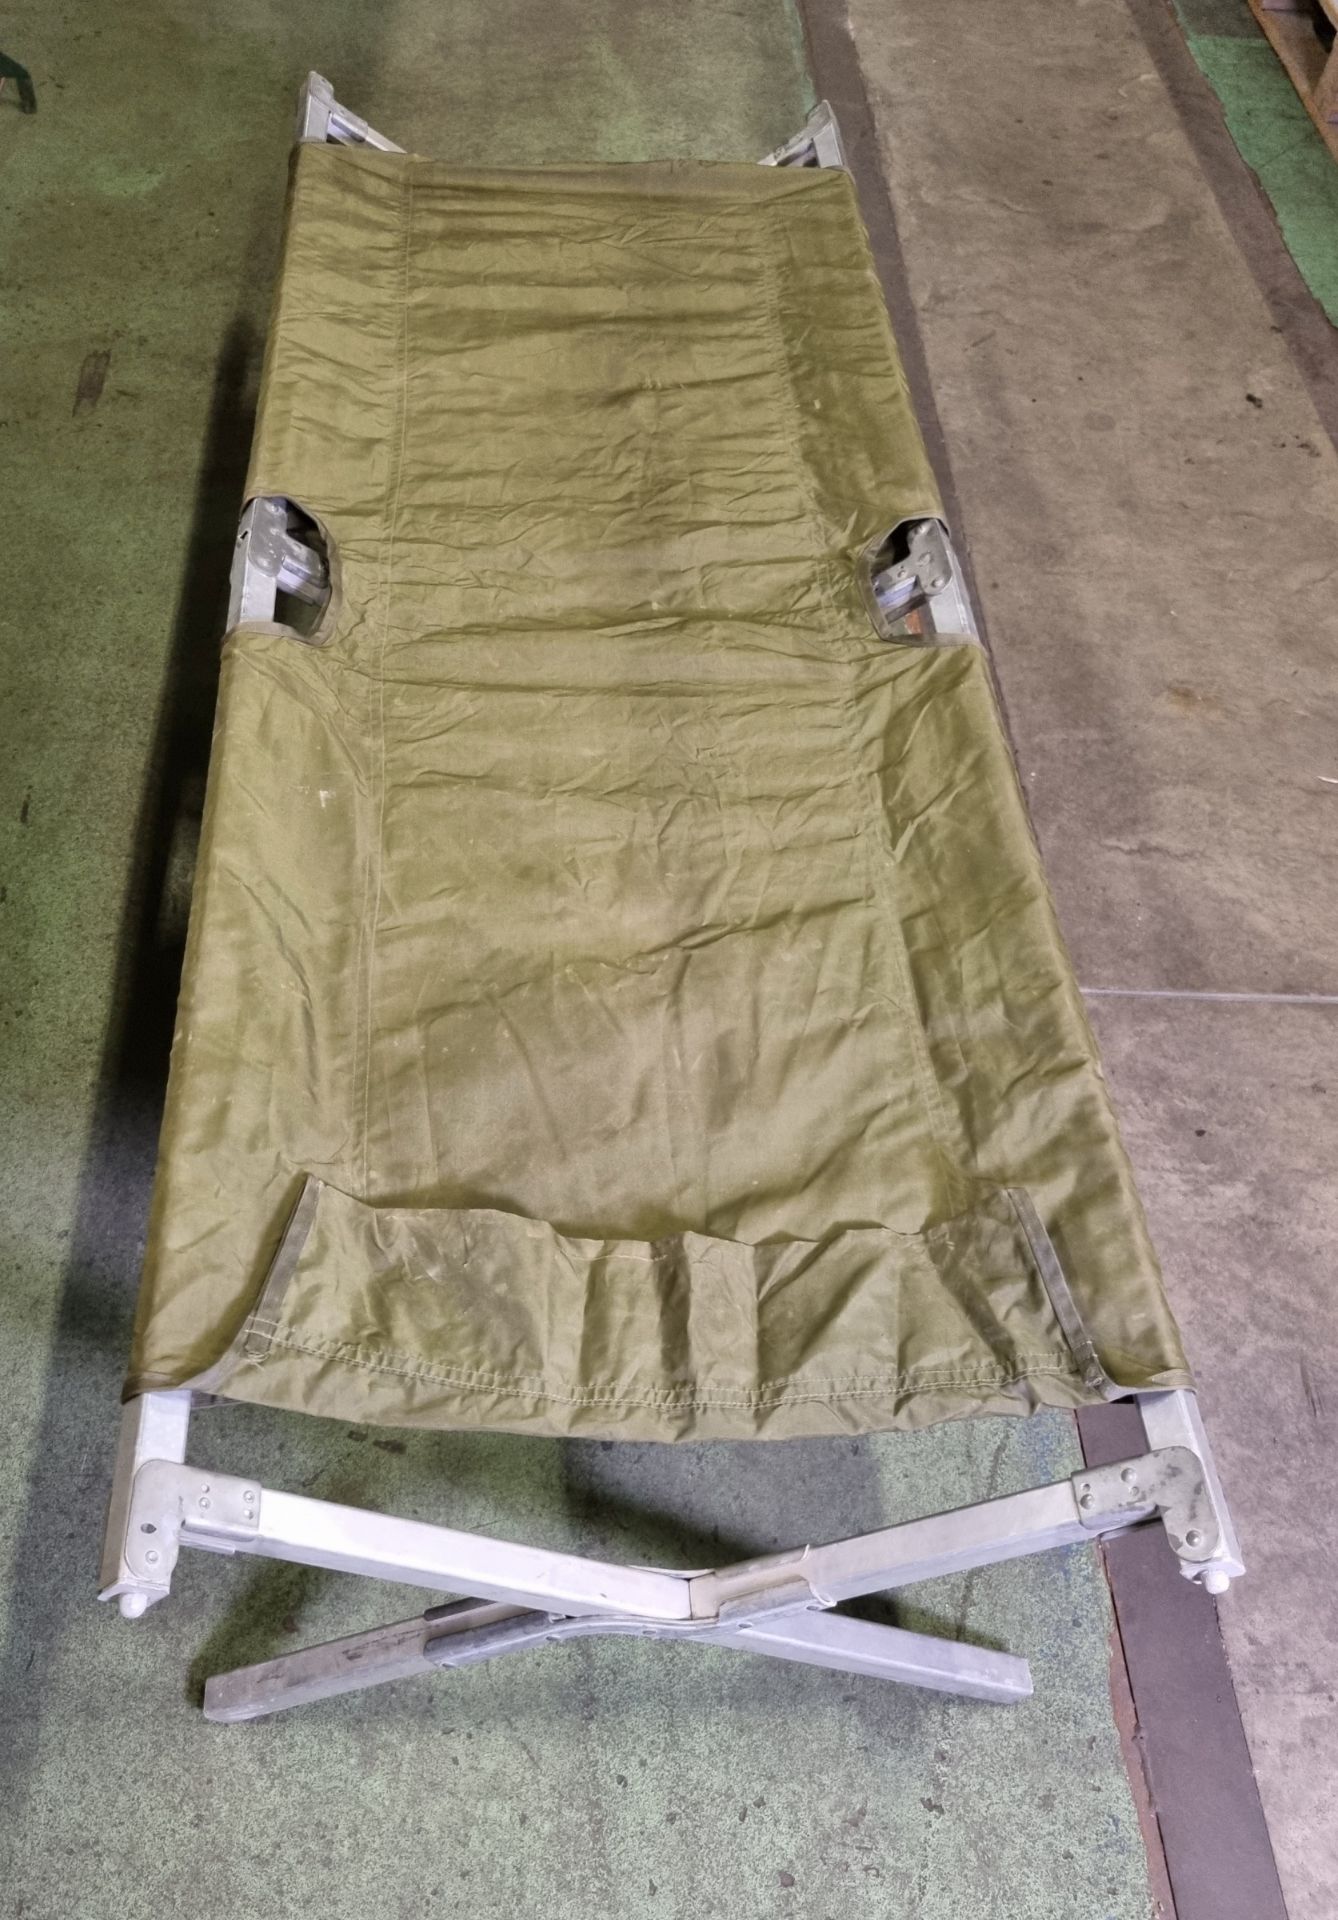 7x folding field cots - L 1900 x W 700 x H 450mm - NO END BARS - Image 6 of 6